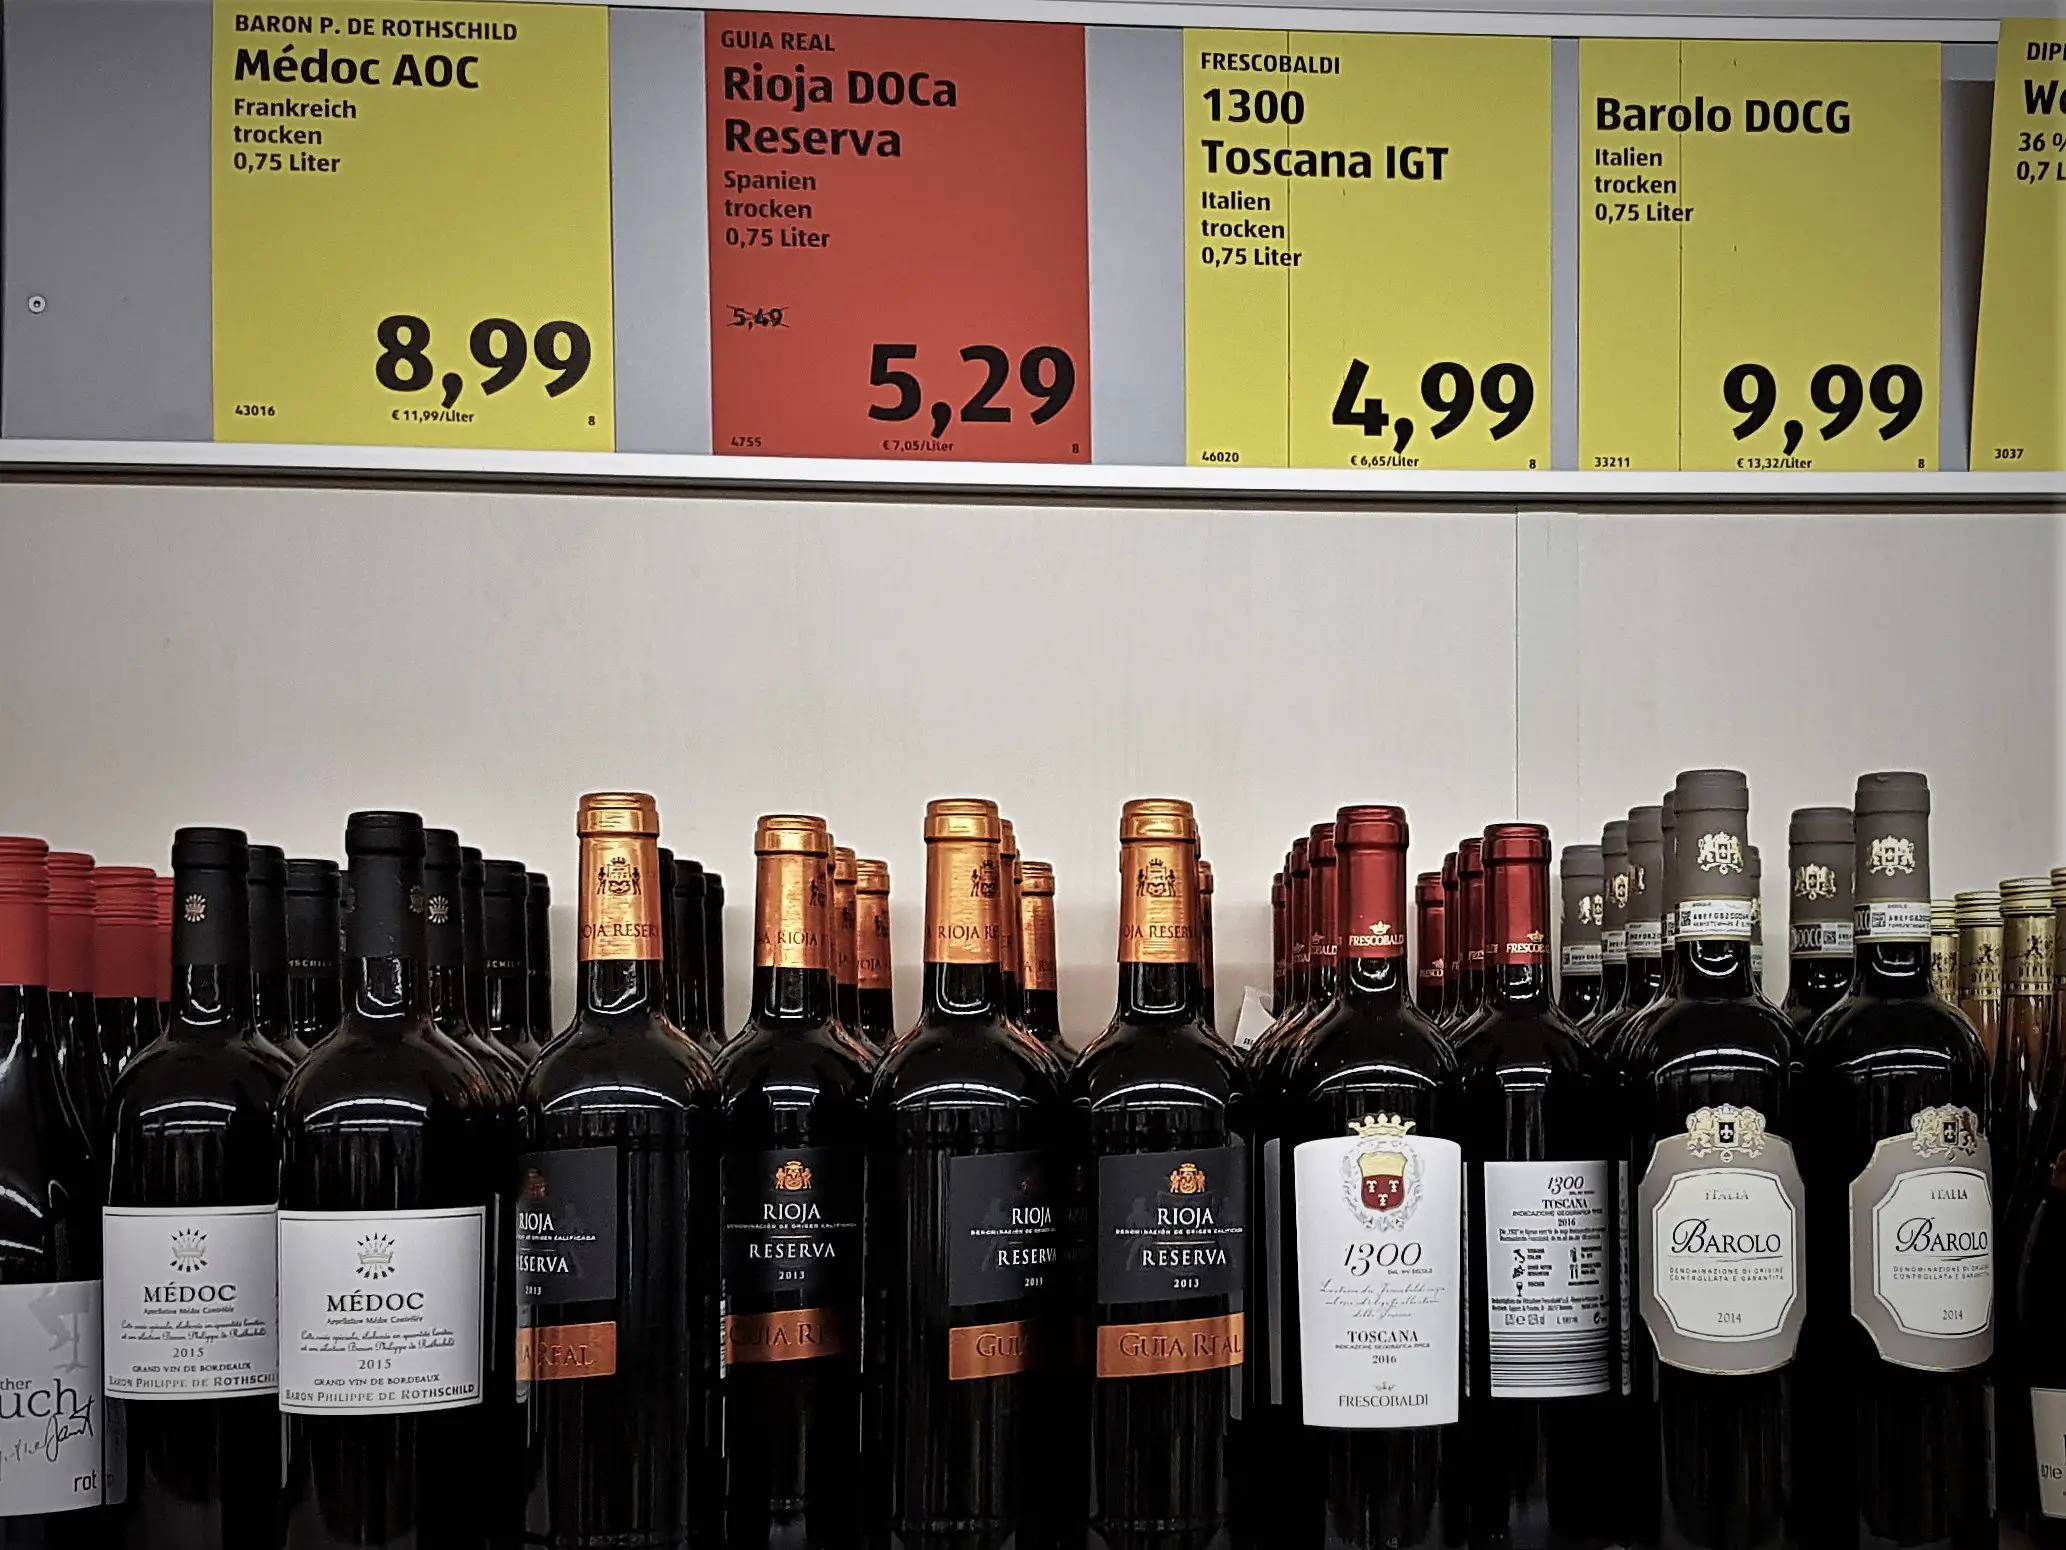 Finding Good Value in Wine